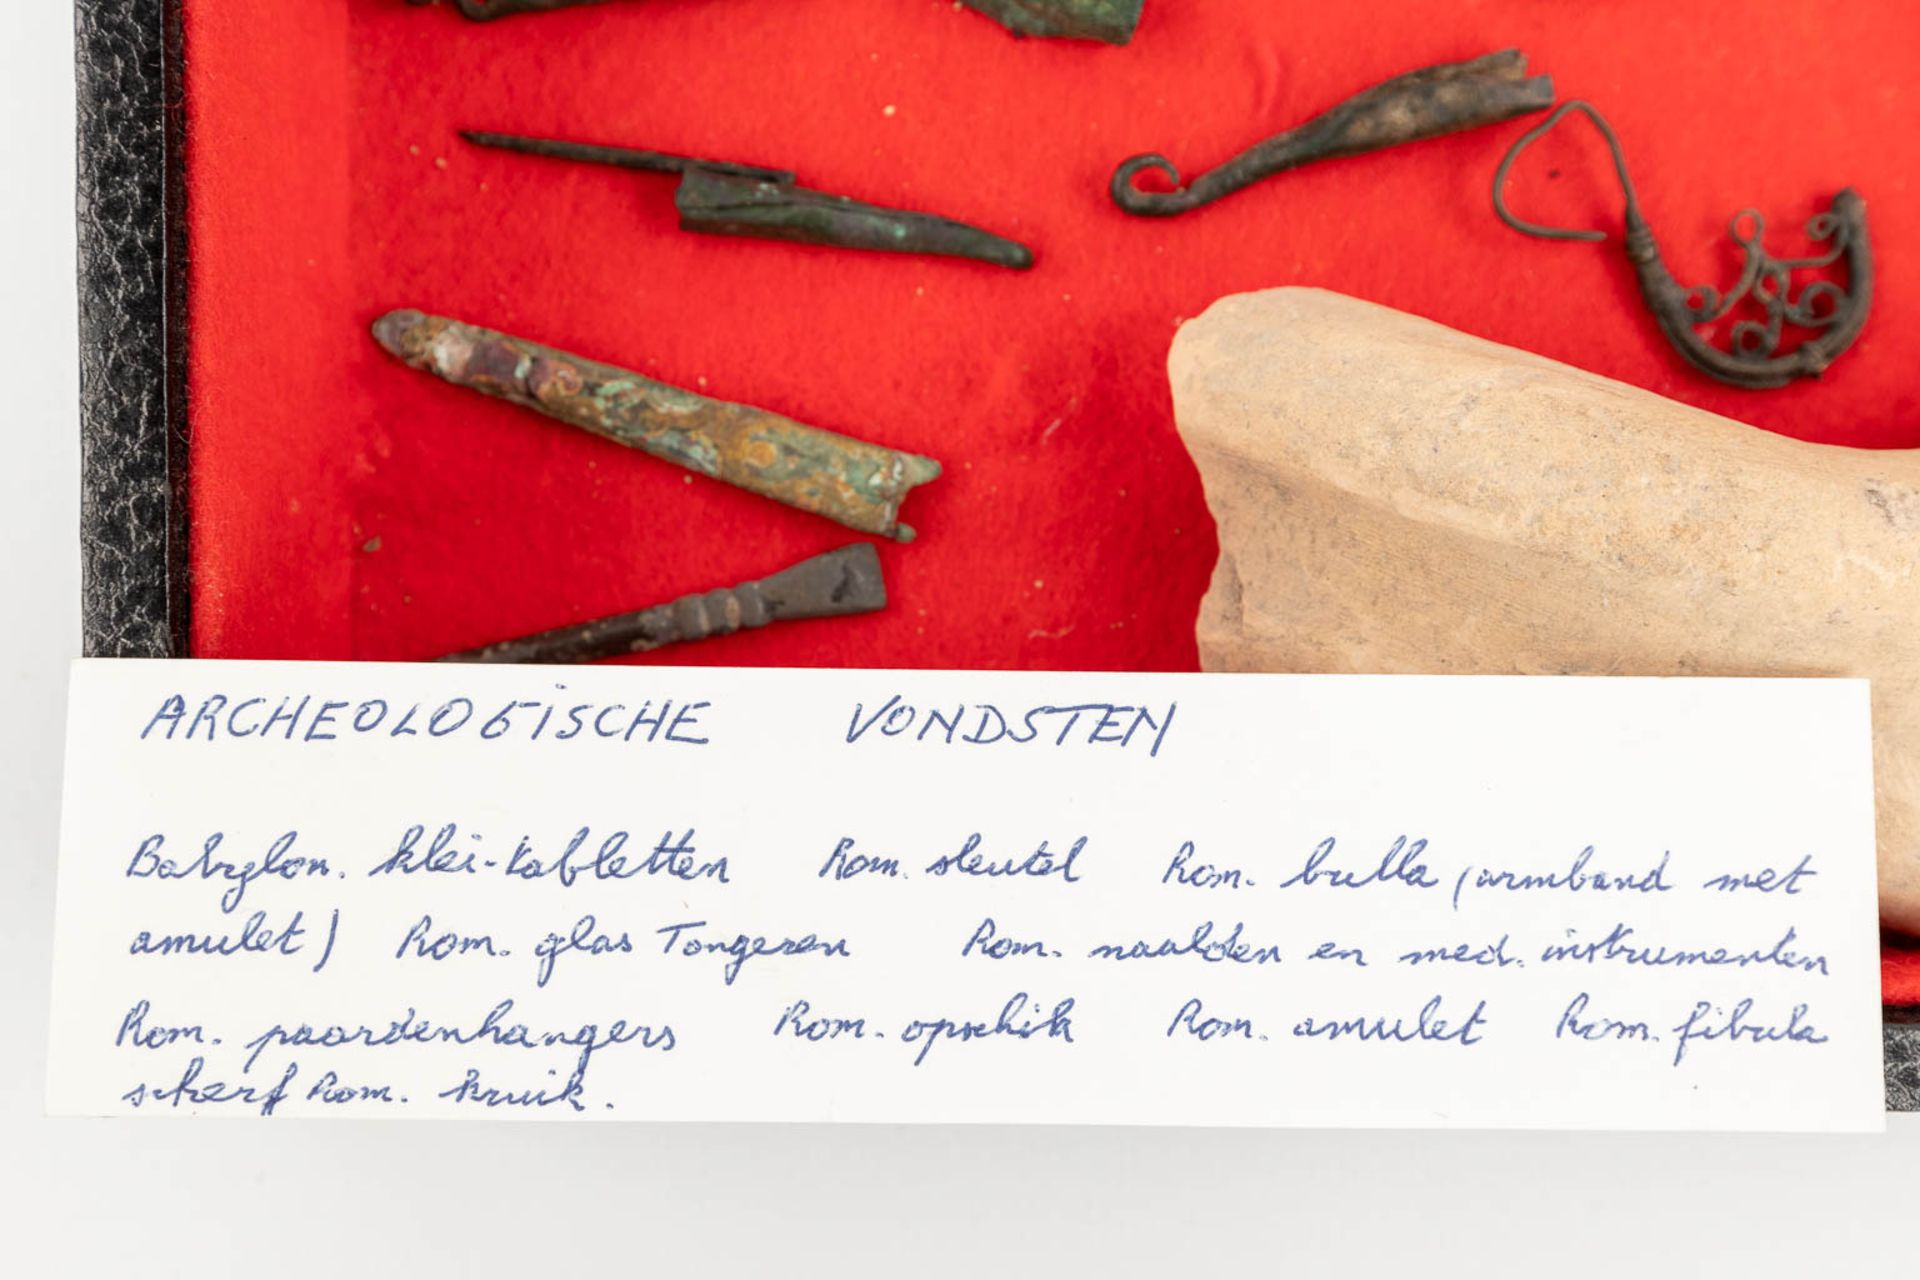 A collection of Archeological finds. - Image 17 of 17